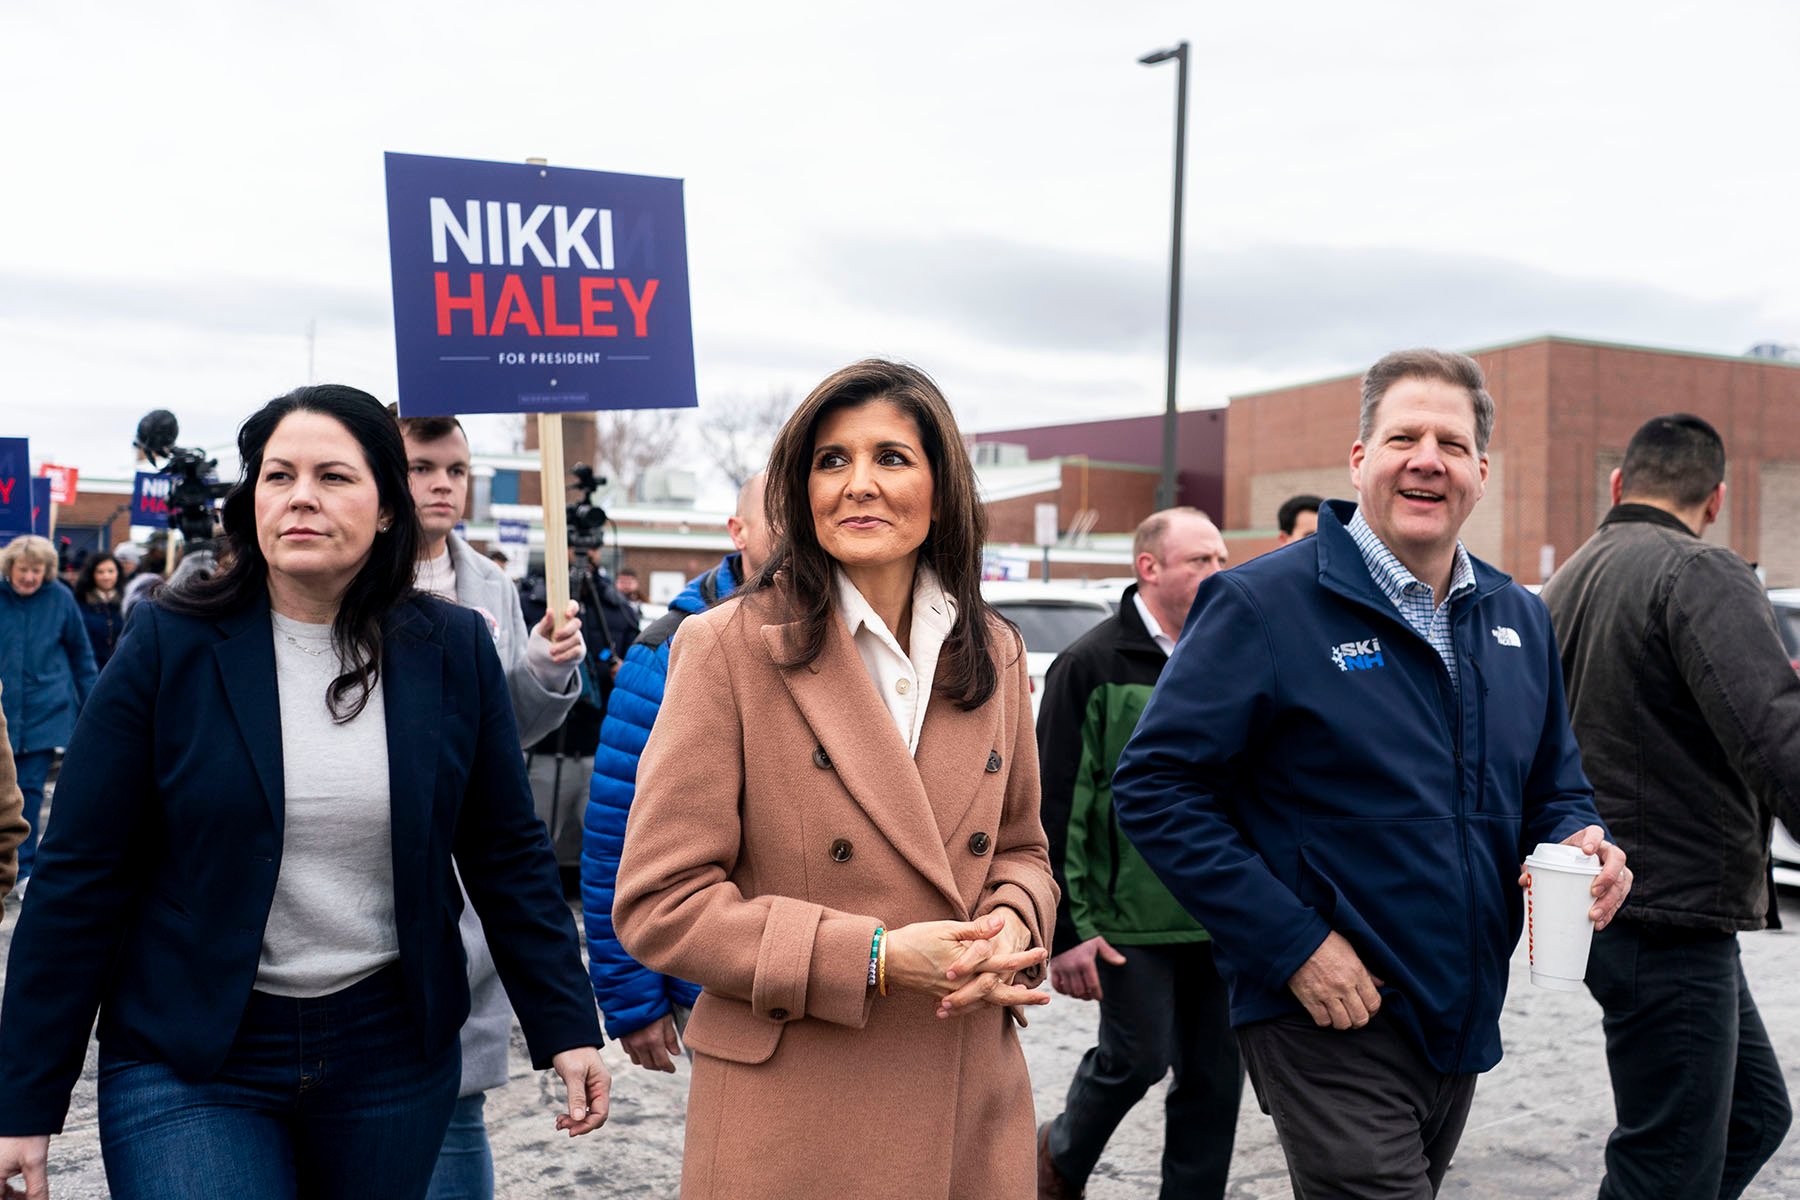 Nikki Haley and New Hampshire Governor Chris Sununu greet voters as they make their way to the polls.